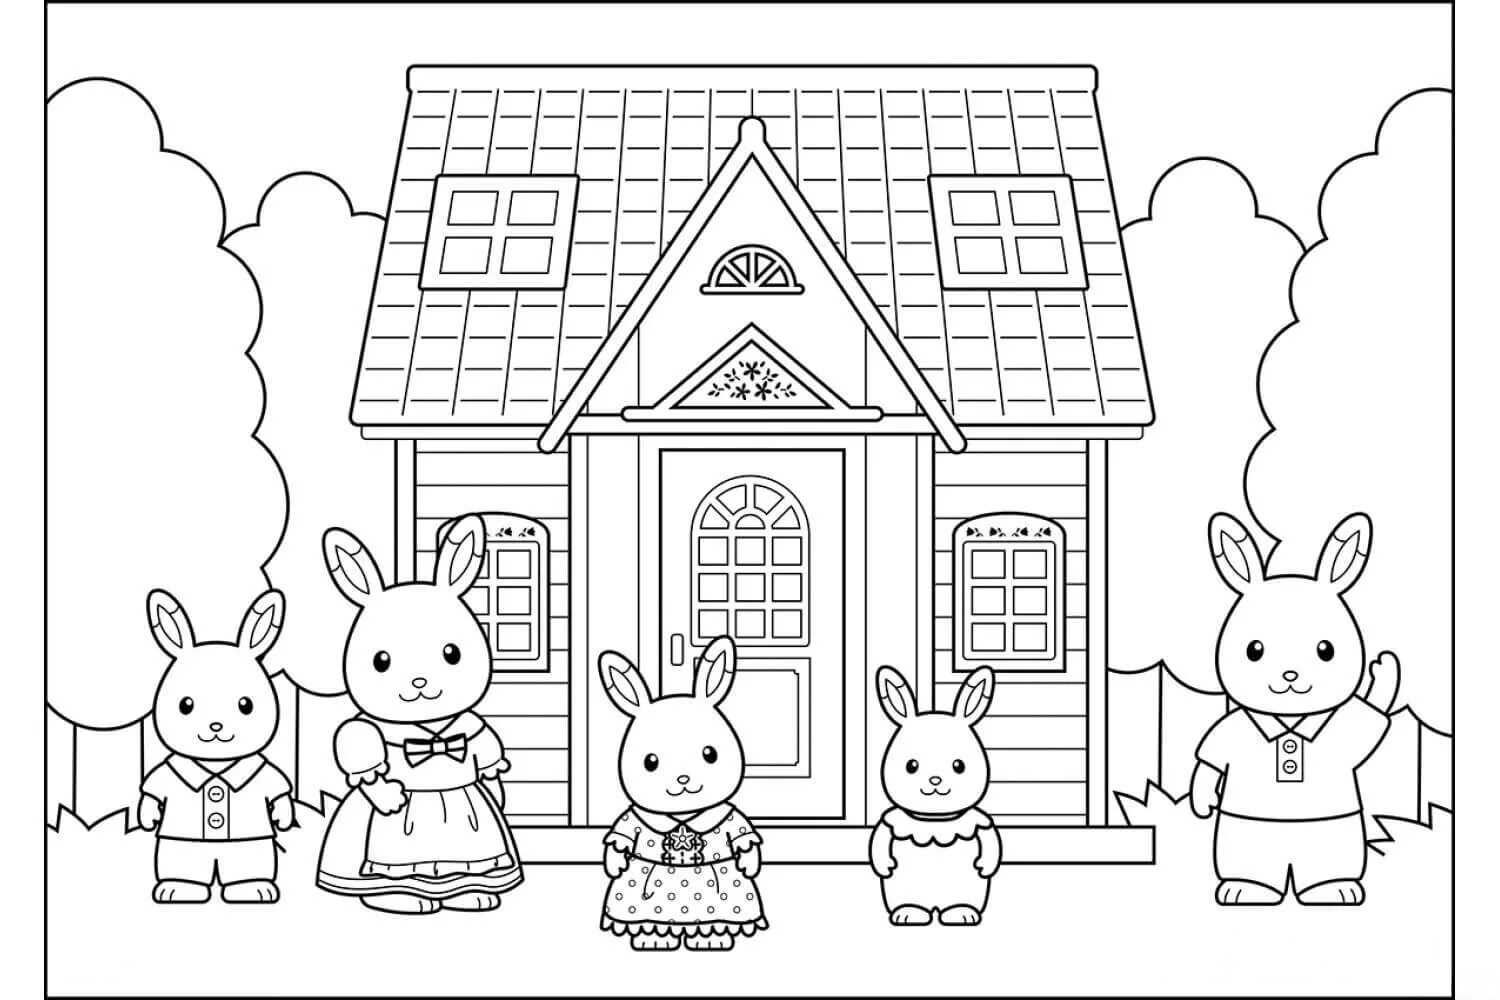 Funny sylvan families coloring pages